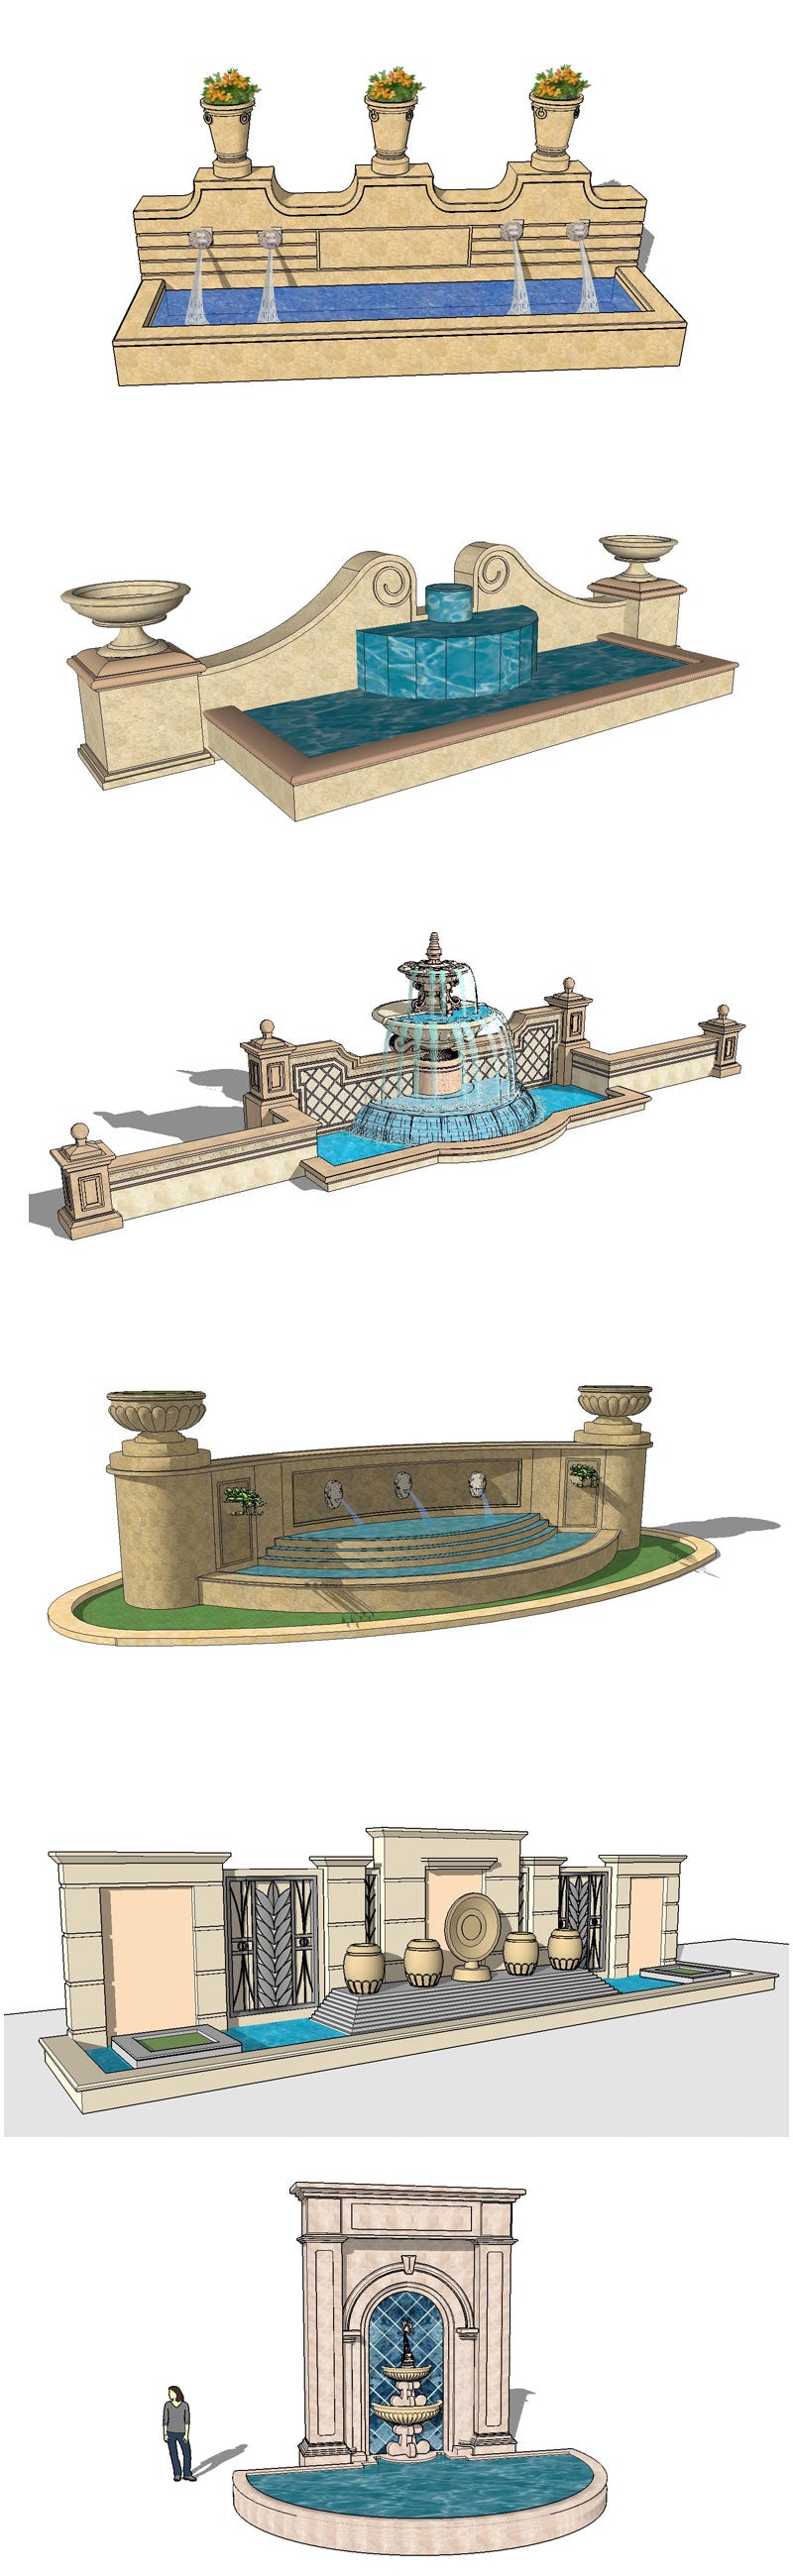 European Fountain & Waterfall Landscape-Sketchup 3D Models(Best Recommanded!!)